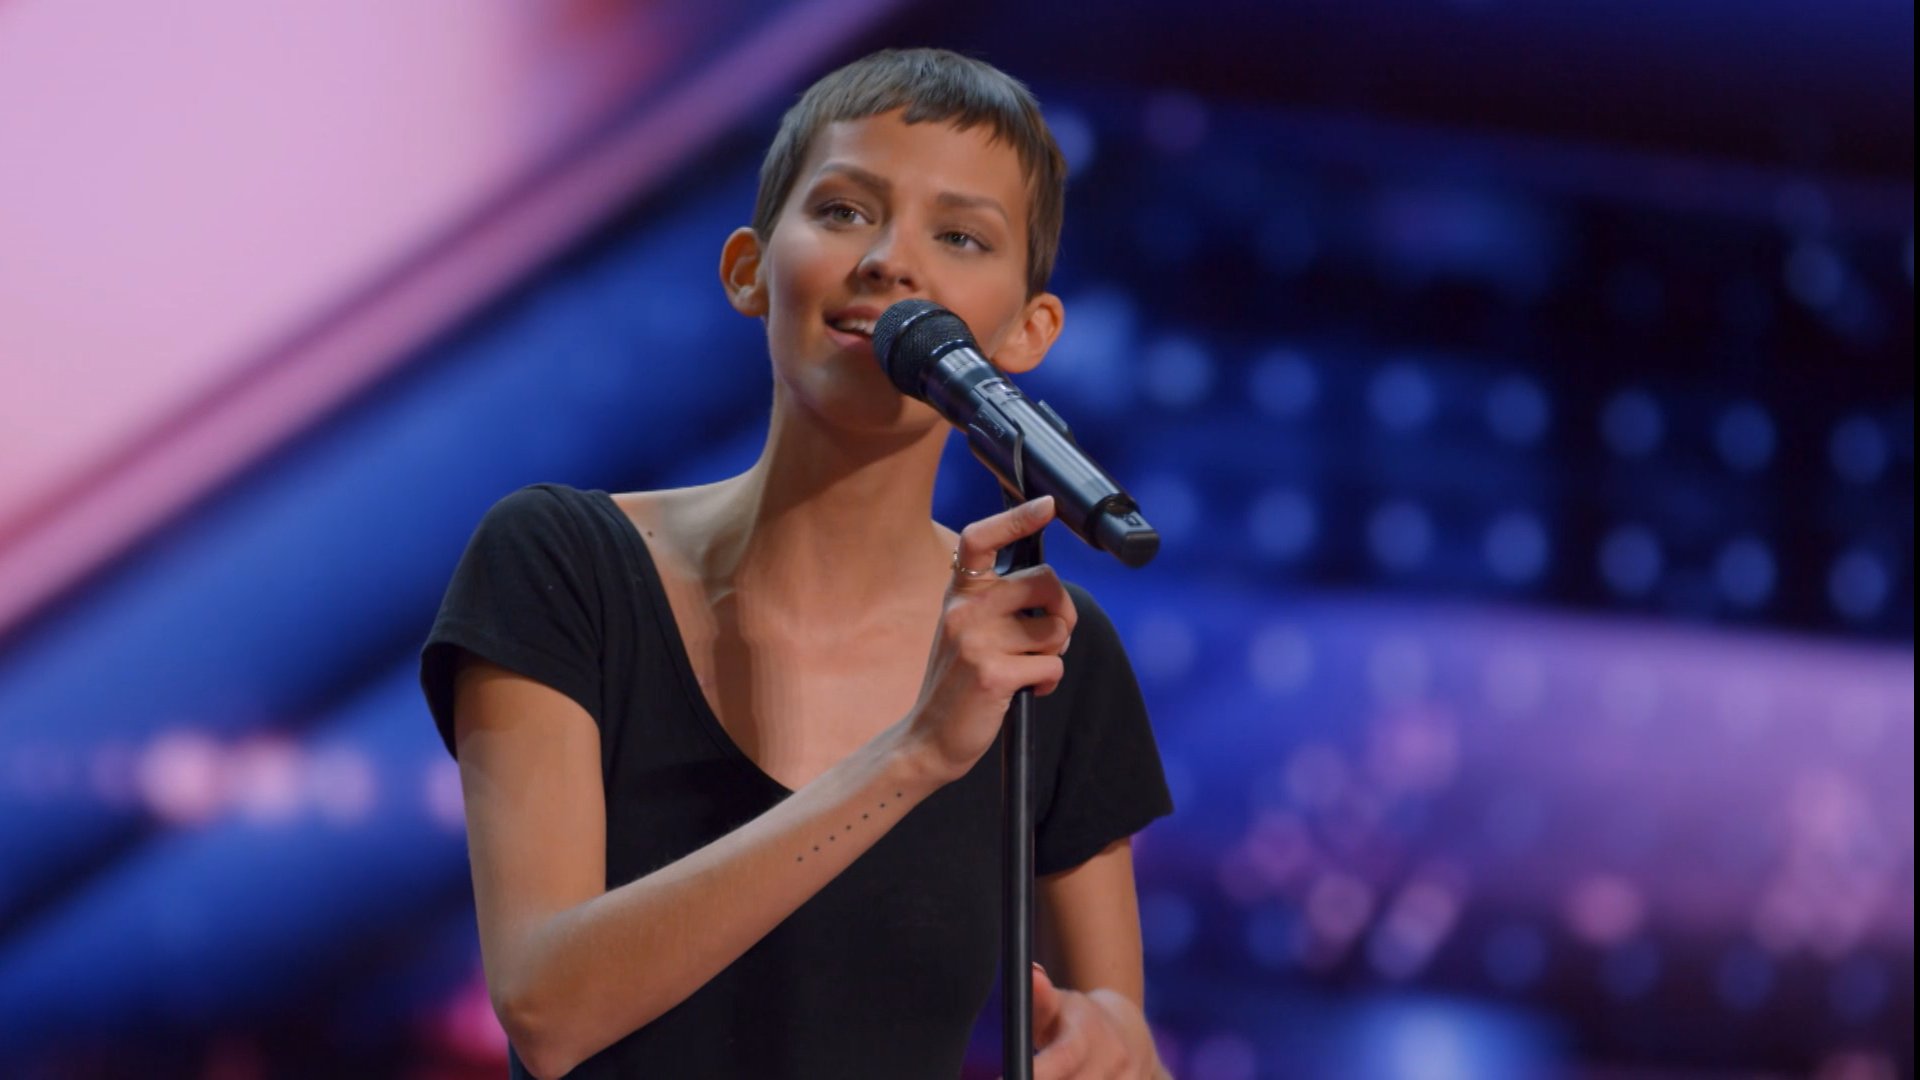 'You can’t wait until life isn’t hard anymore before you decide to be happy,' Nightbirde famously said during her first appearance on 'AGT.'